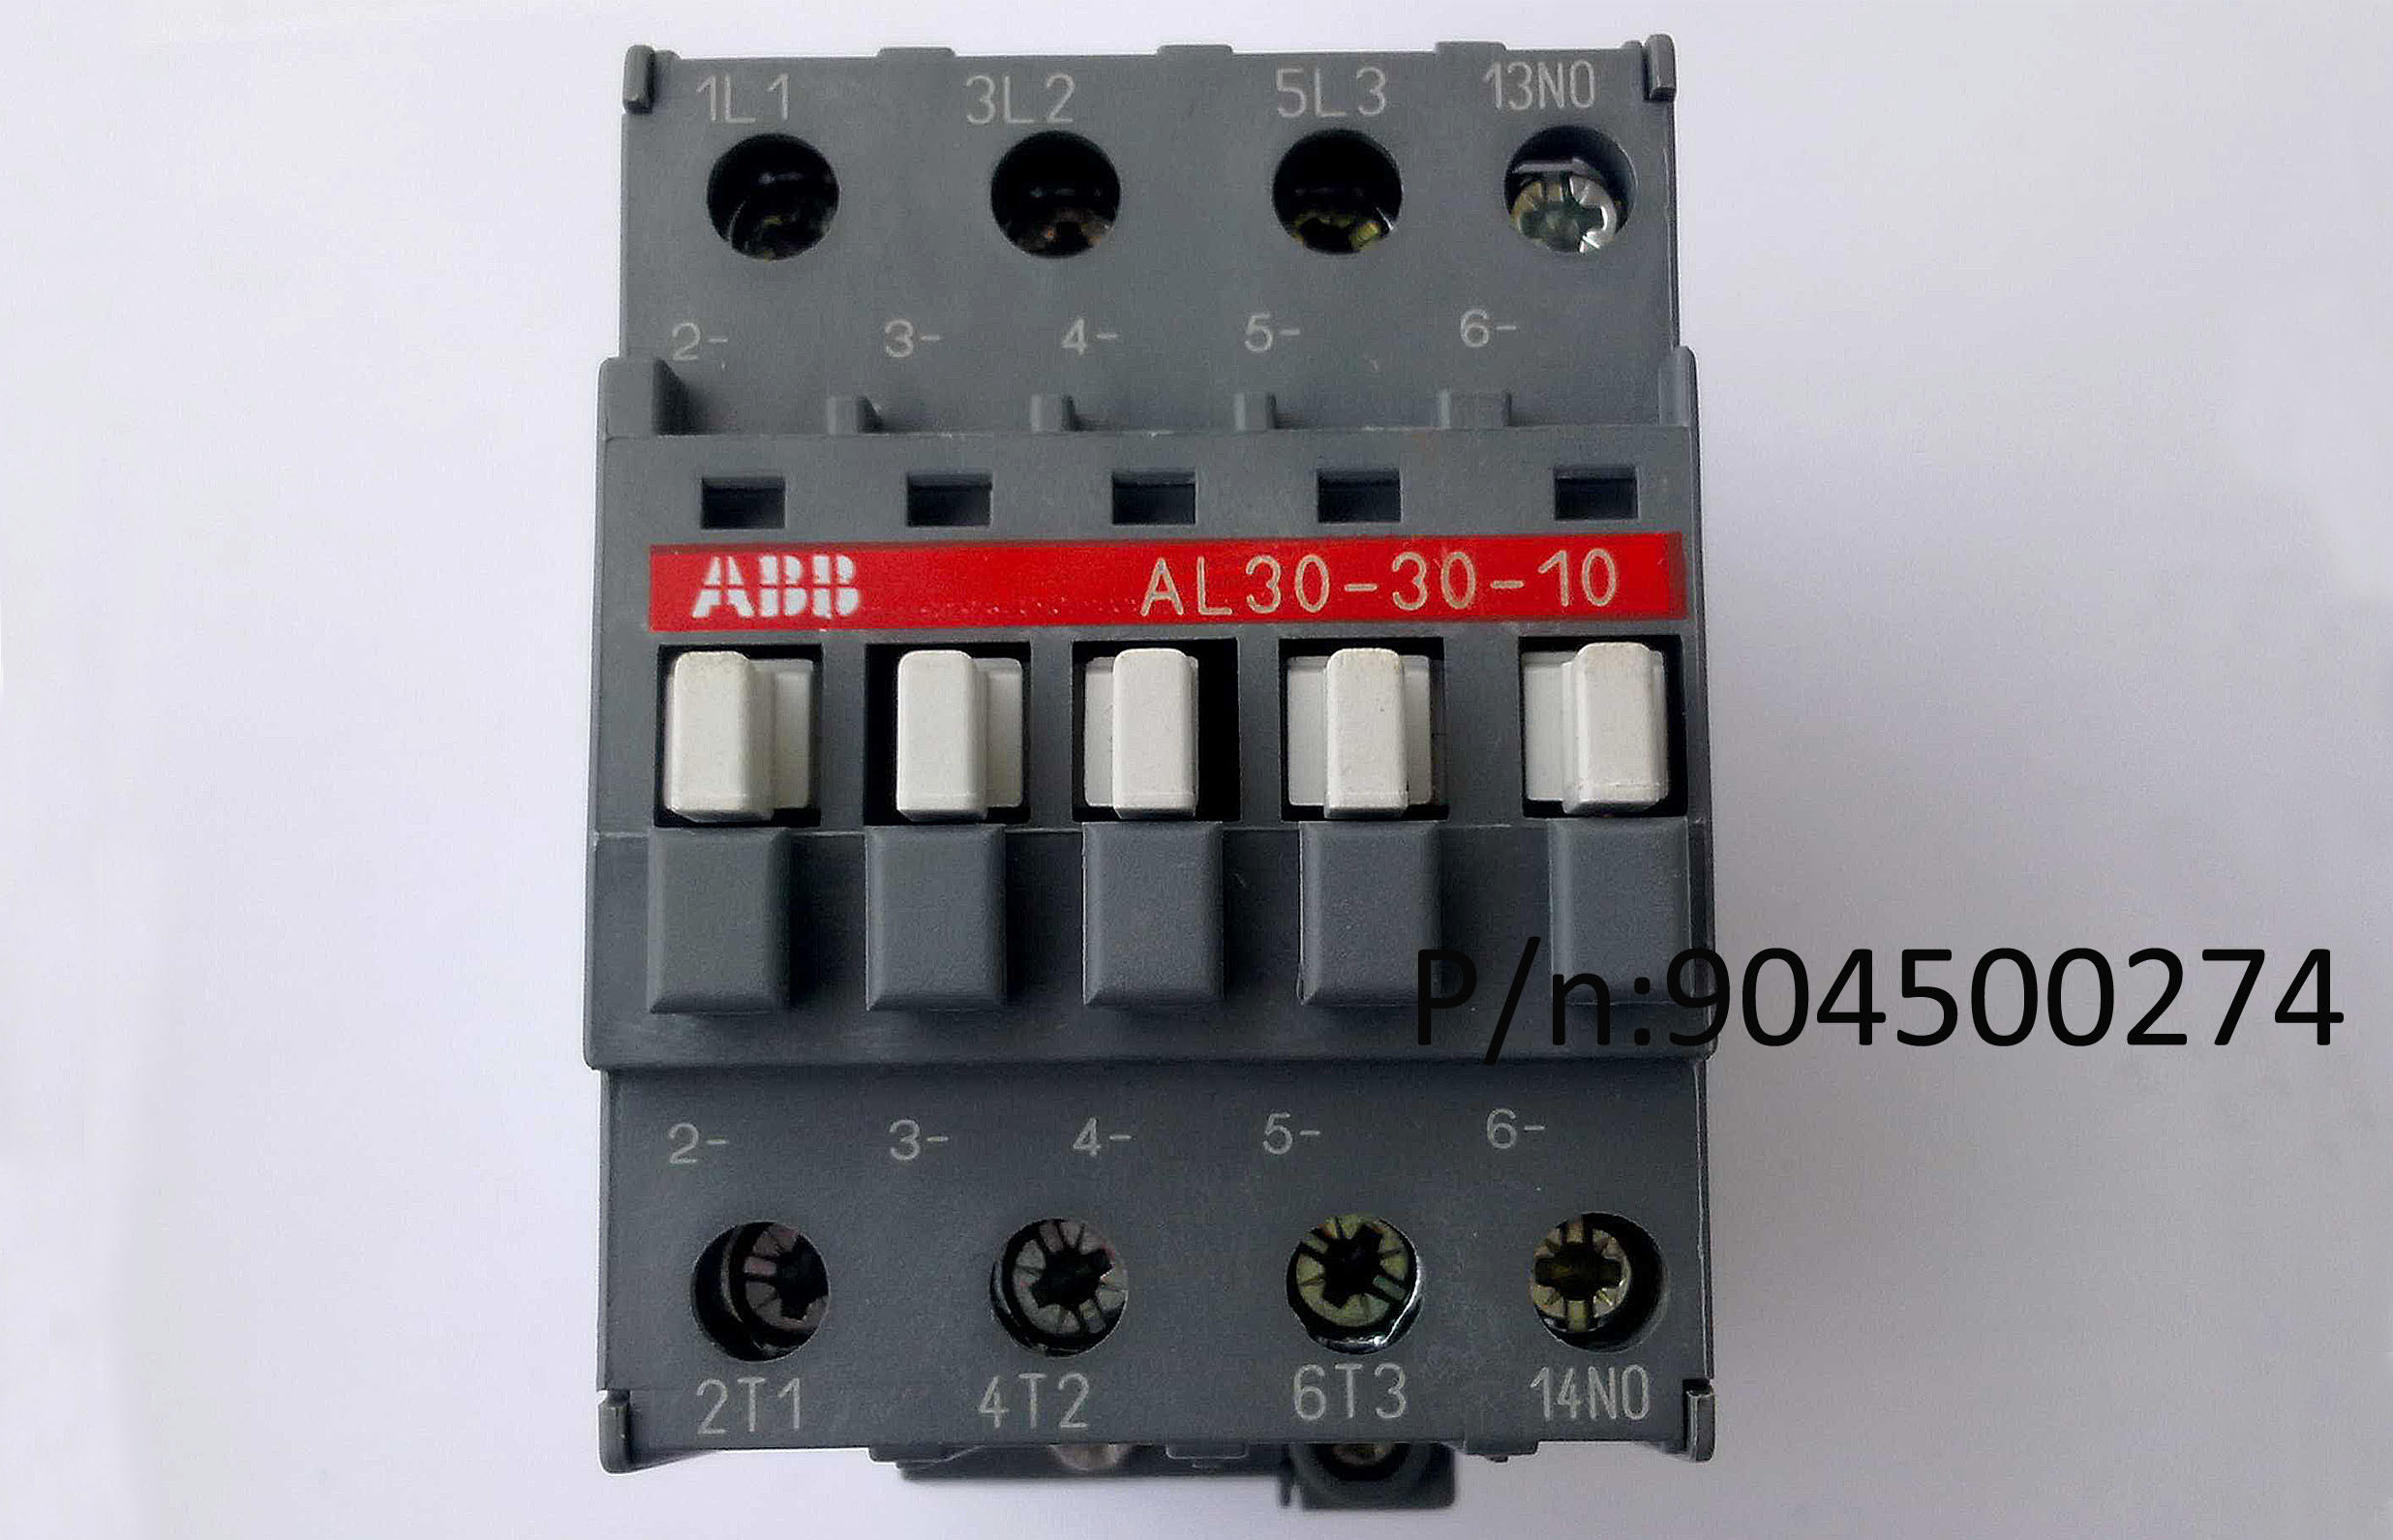 China ABB Contactor #A75-30-11 Especially Suitable For GT5250 S7200 904500274 factory